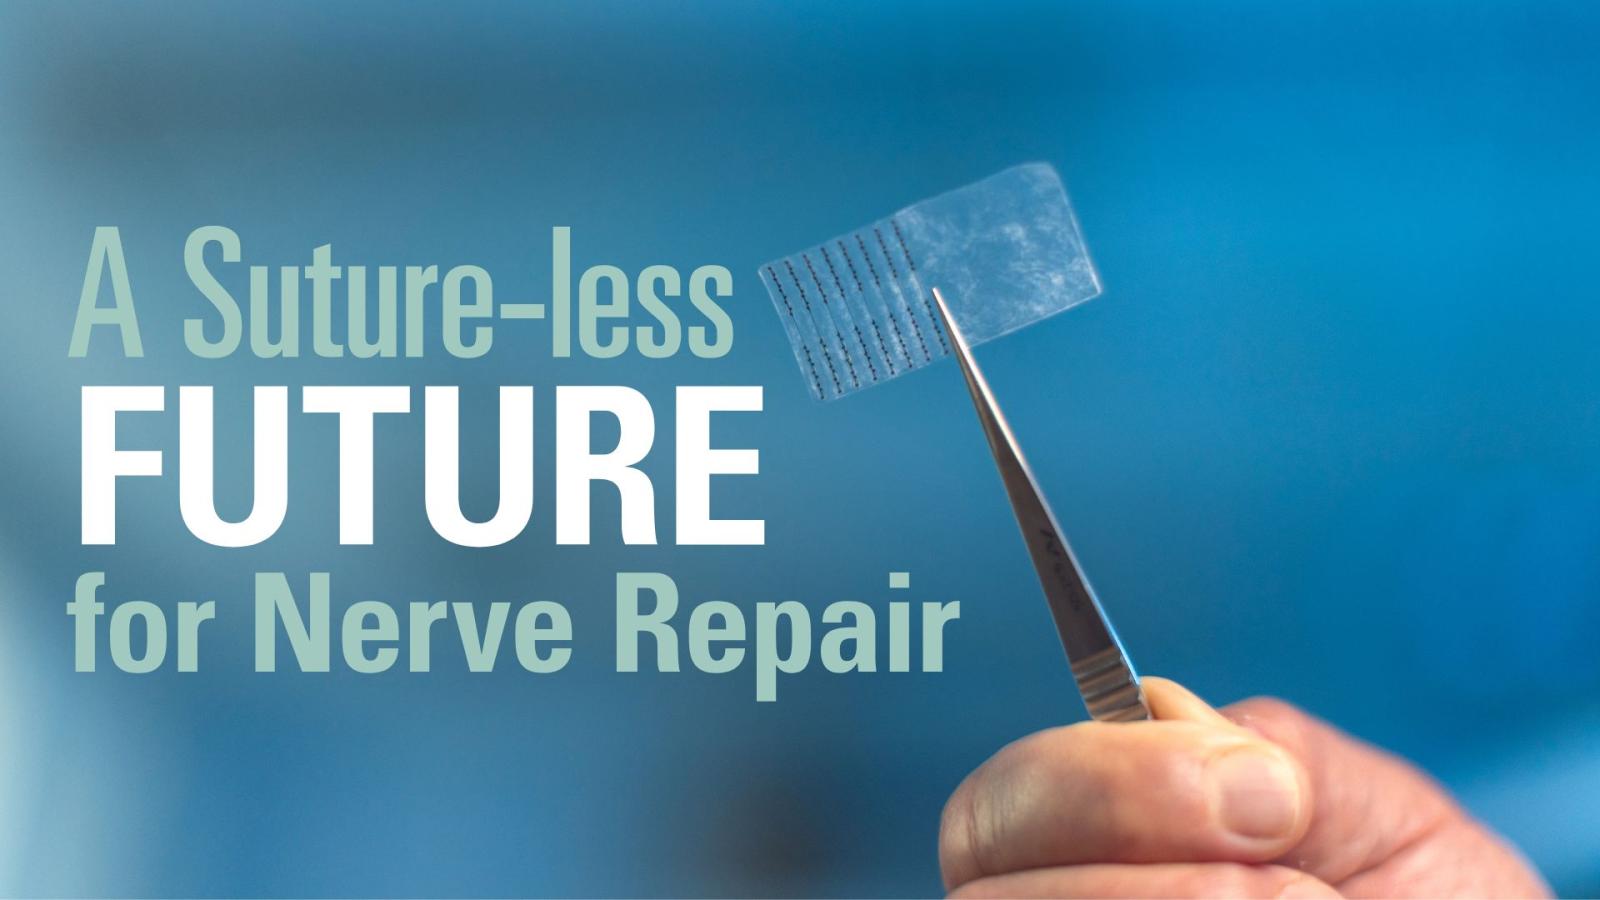 a sutre-less future for nerve repair